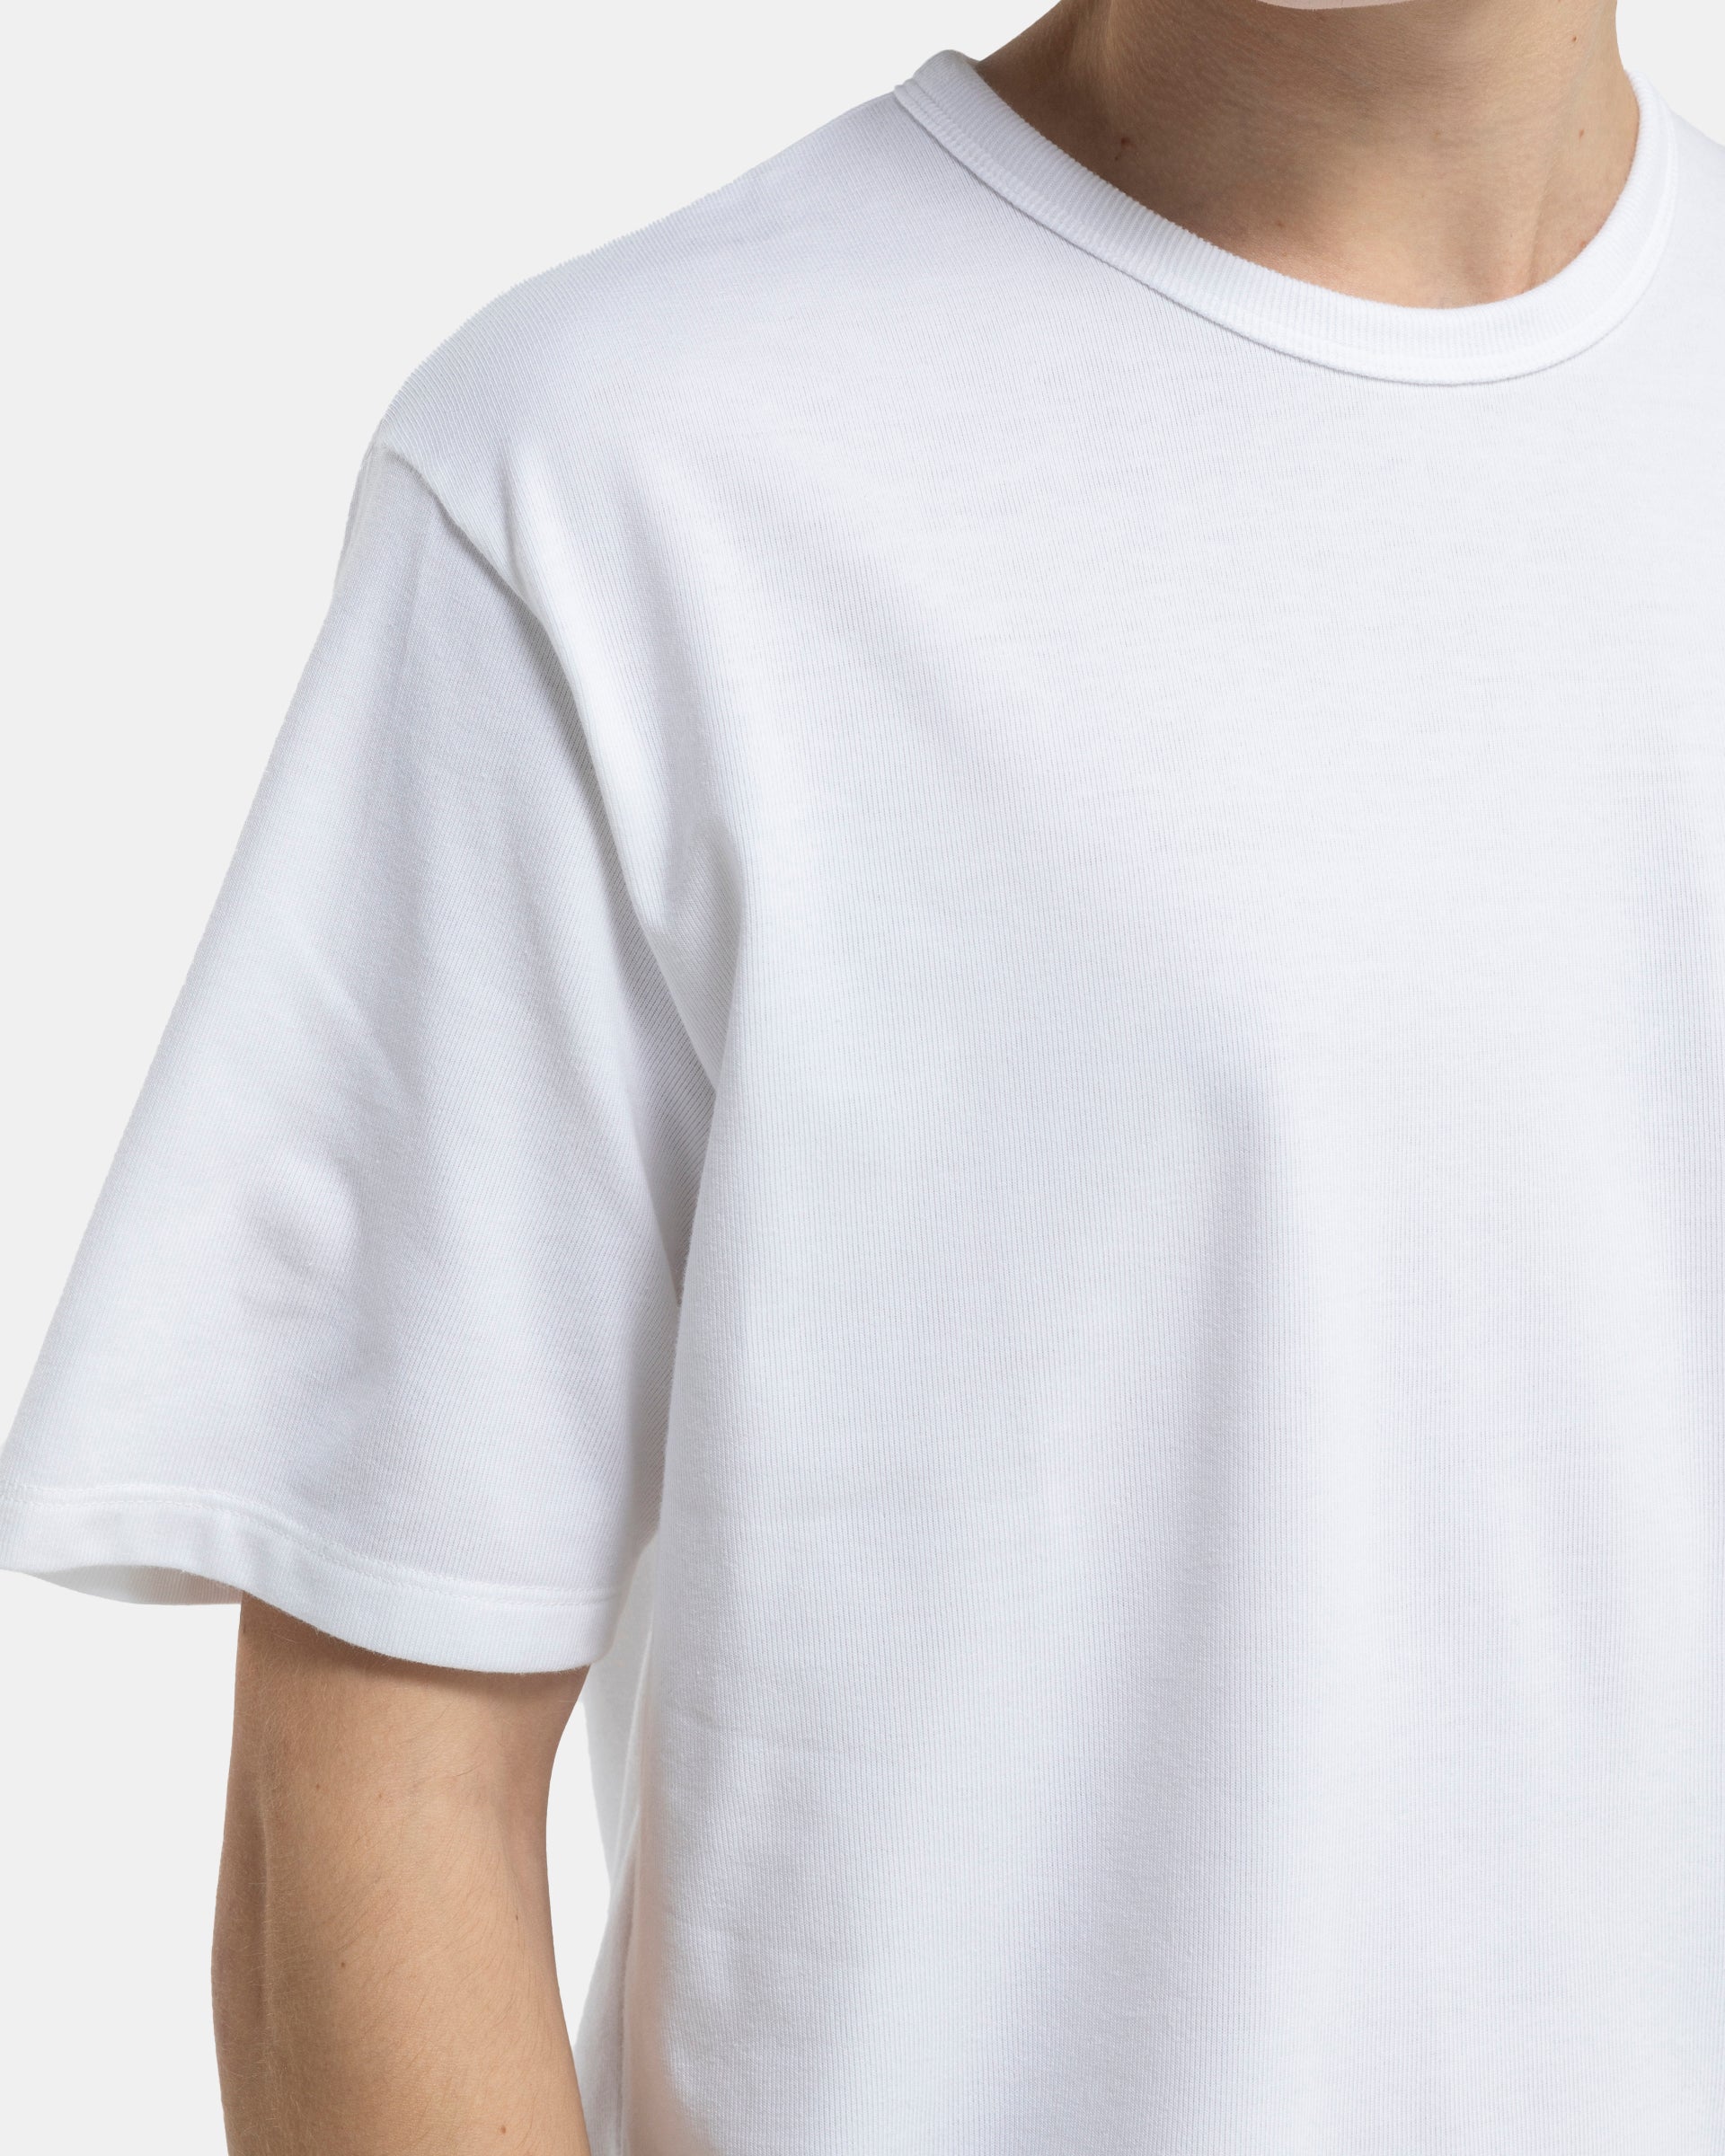 COOLMAX Jersey T-Shirt in White